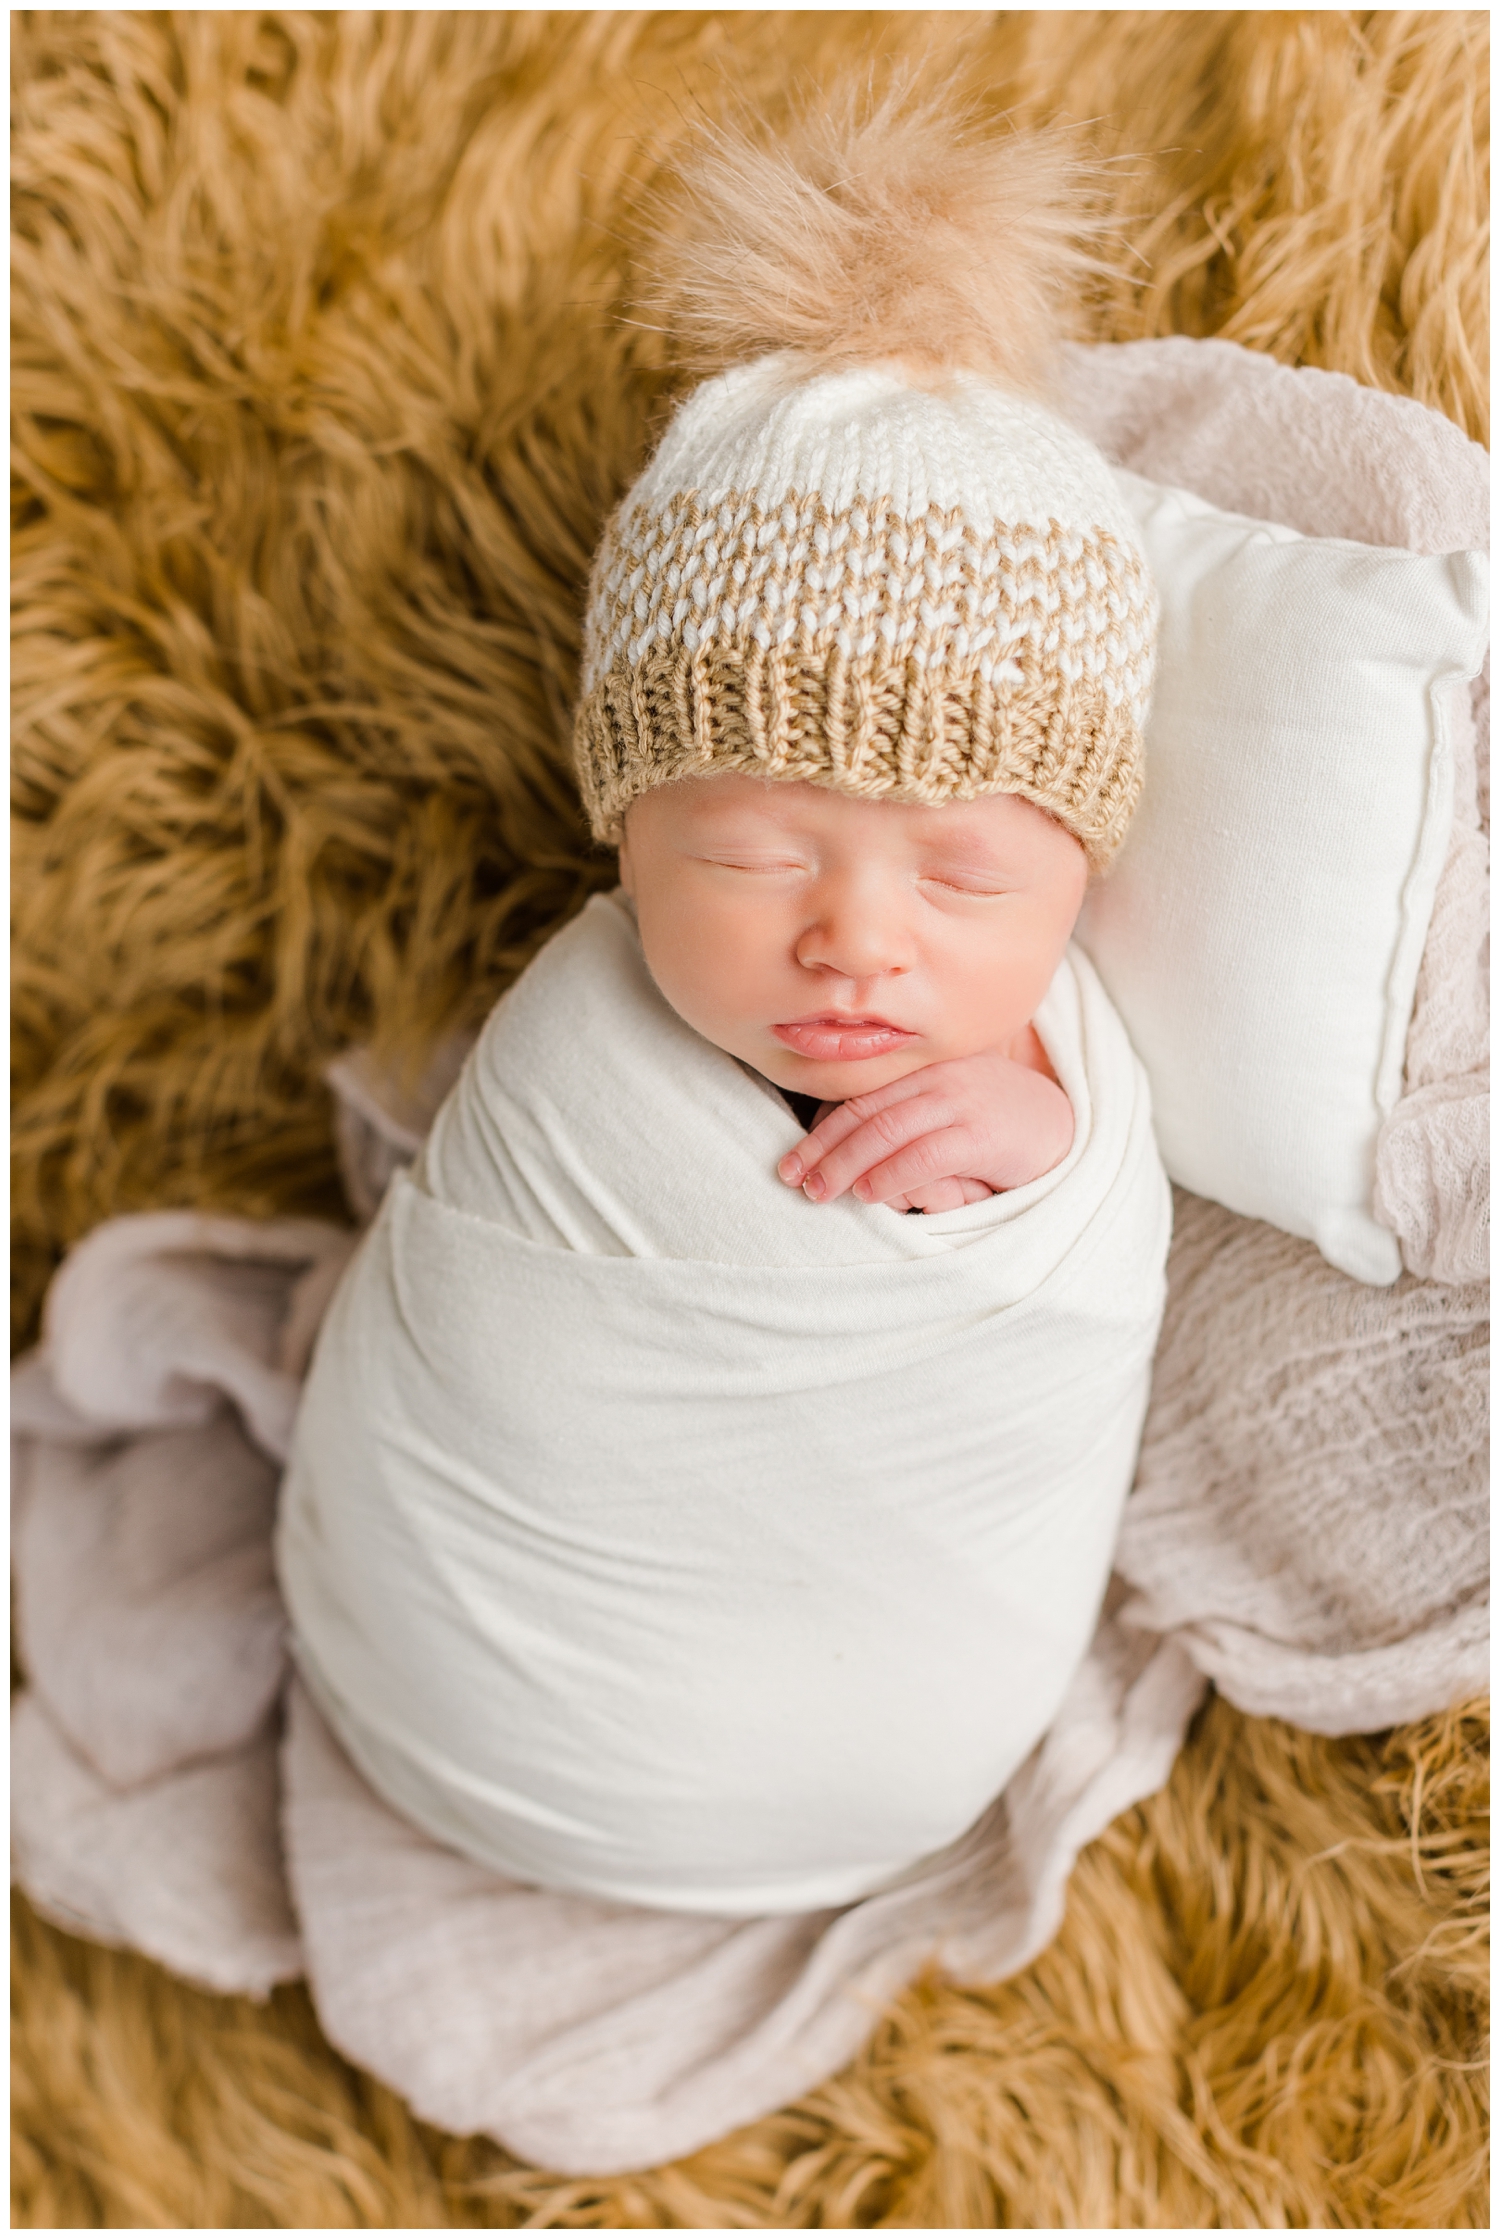 Baby Hudsyn wrapped in white and wearing a knit beanie and nestled on a camel colored flotaki | CB Studio